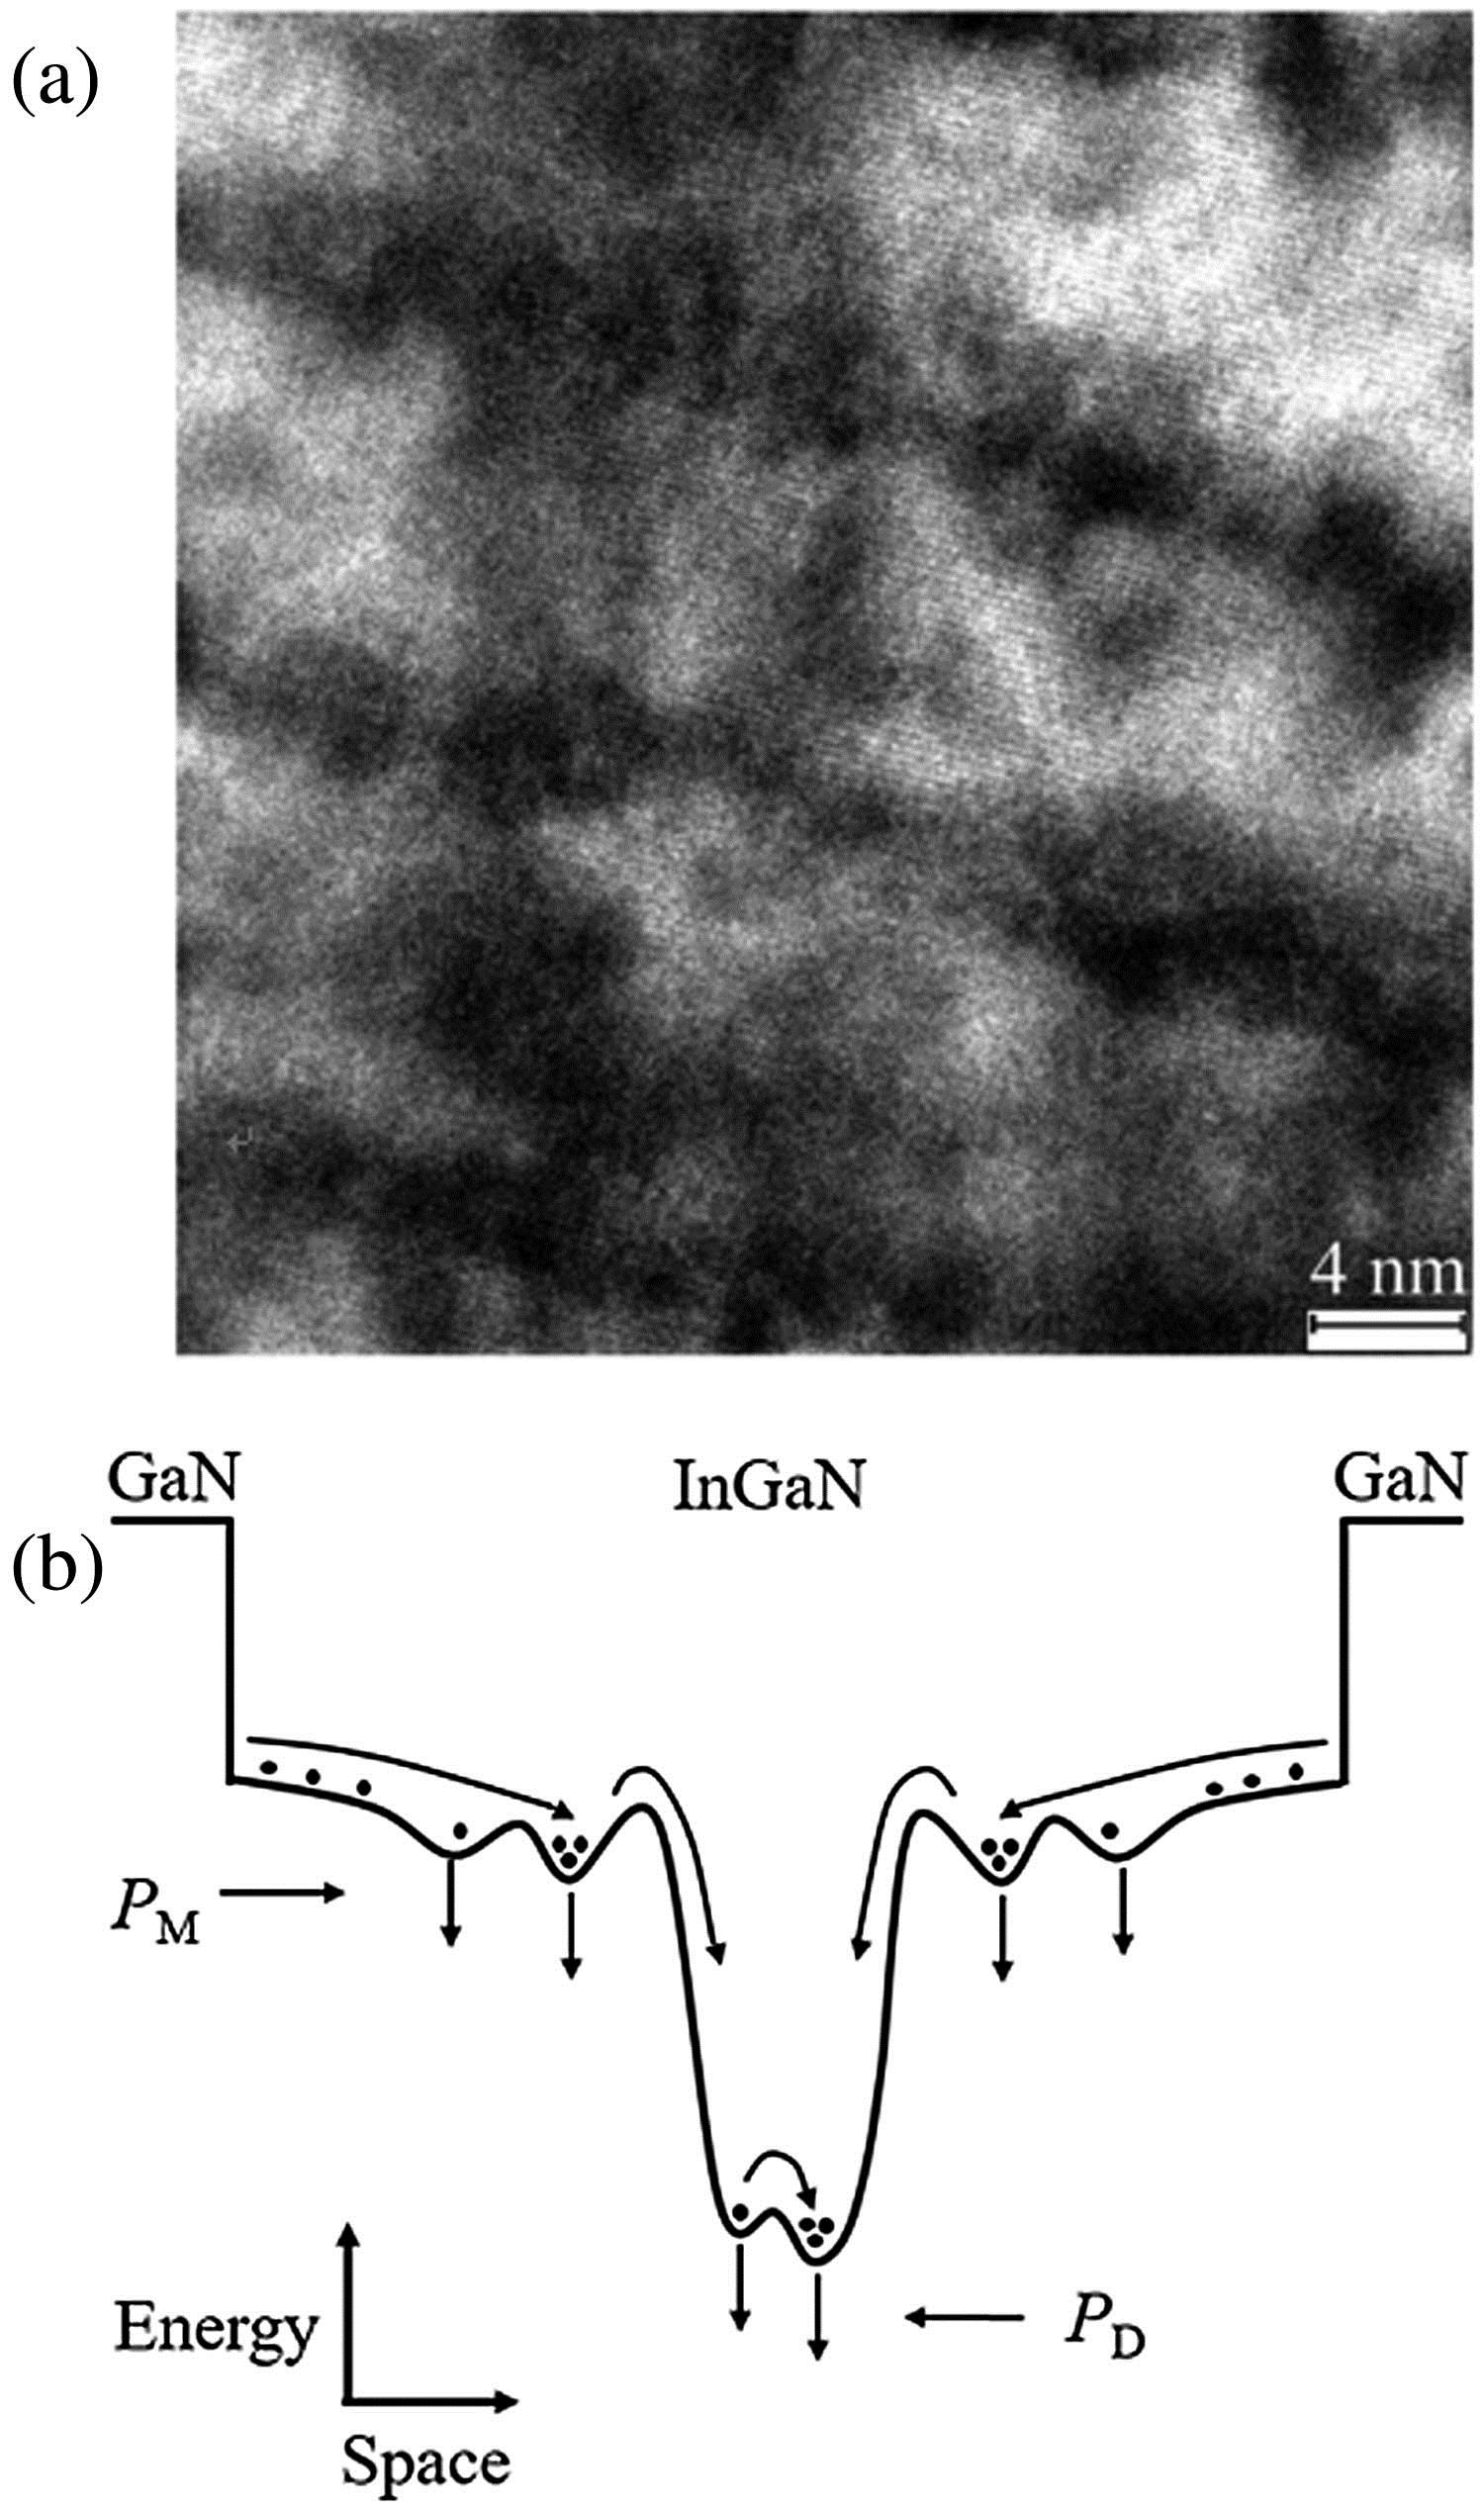 (a) Cross-sectional HRTEM image of the InGaN/GaN MQWs sample and (b) schematic diagram of the potential distribution in the InGaN/GaN MQWs for describing possible paths of carrier transfer.